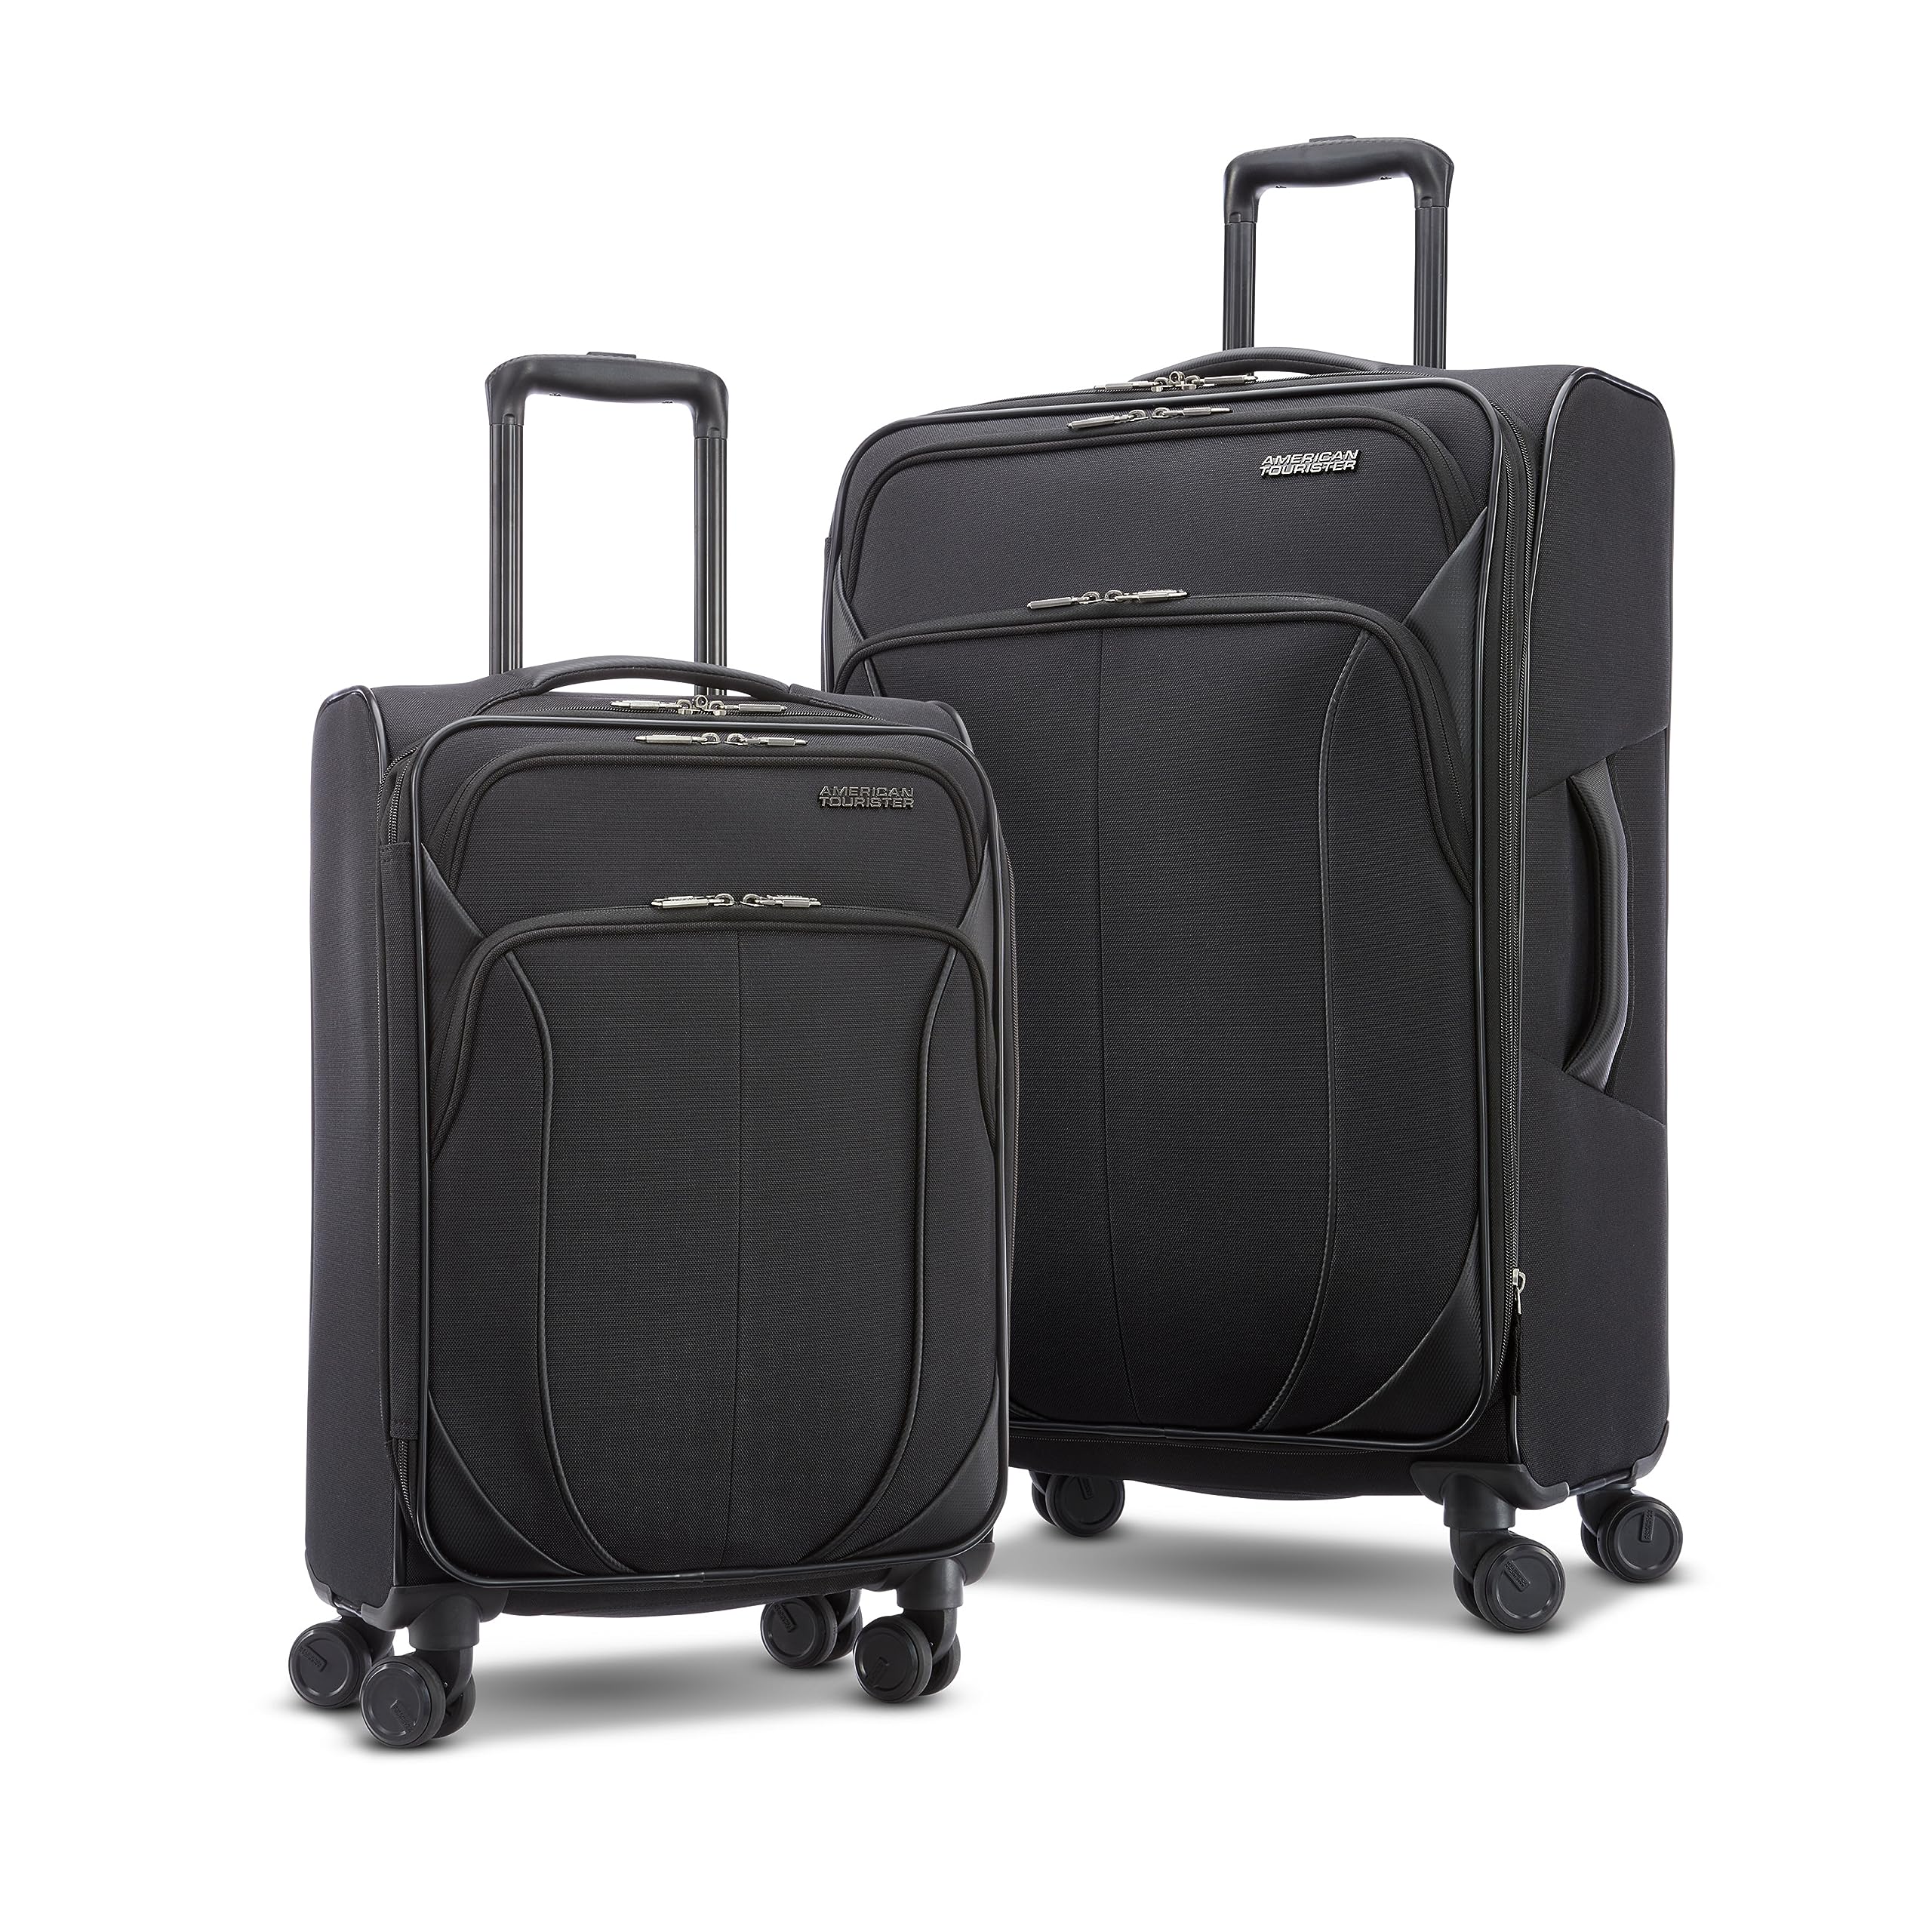 AMERICAN TOURISTER 4 KIX 2.0 Softside Expandable Luggage with Spinners, Black, 2-Piece Set (20/24)